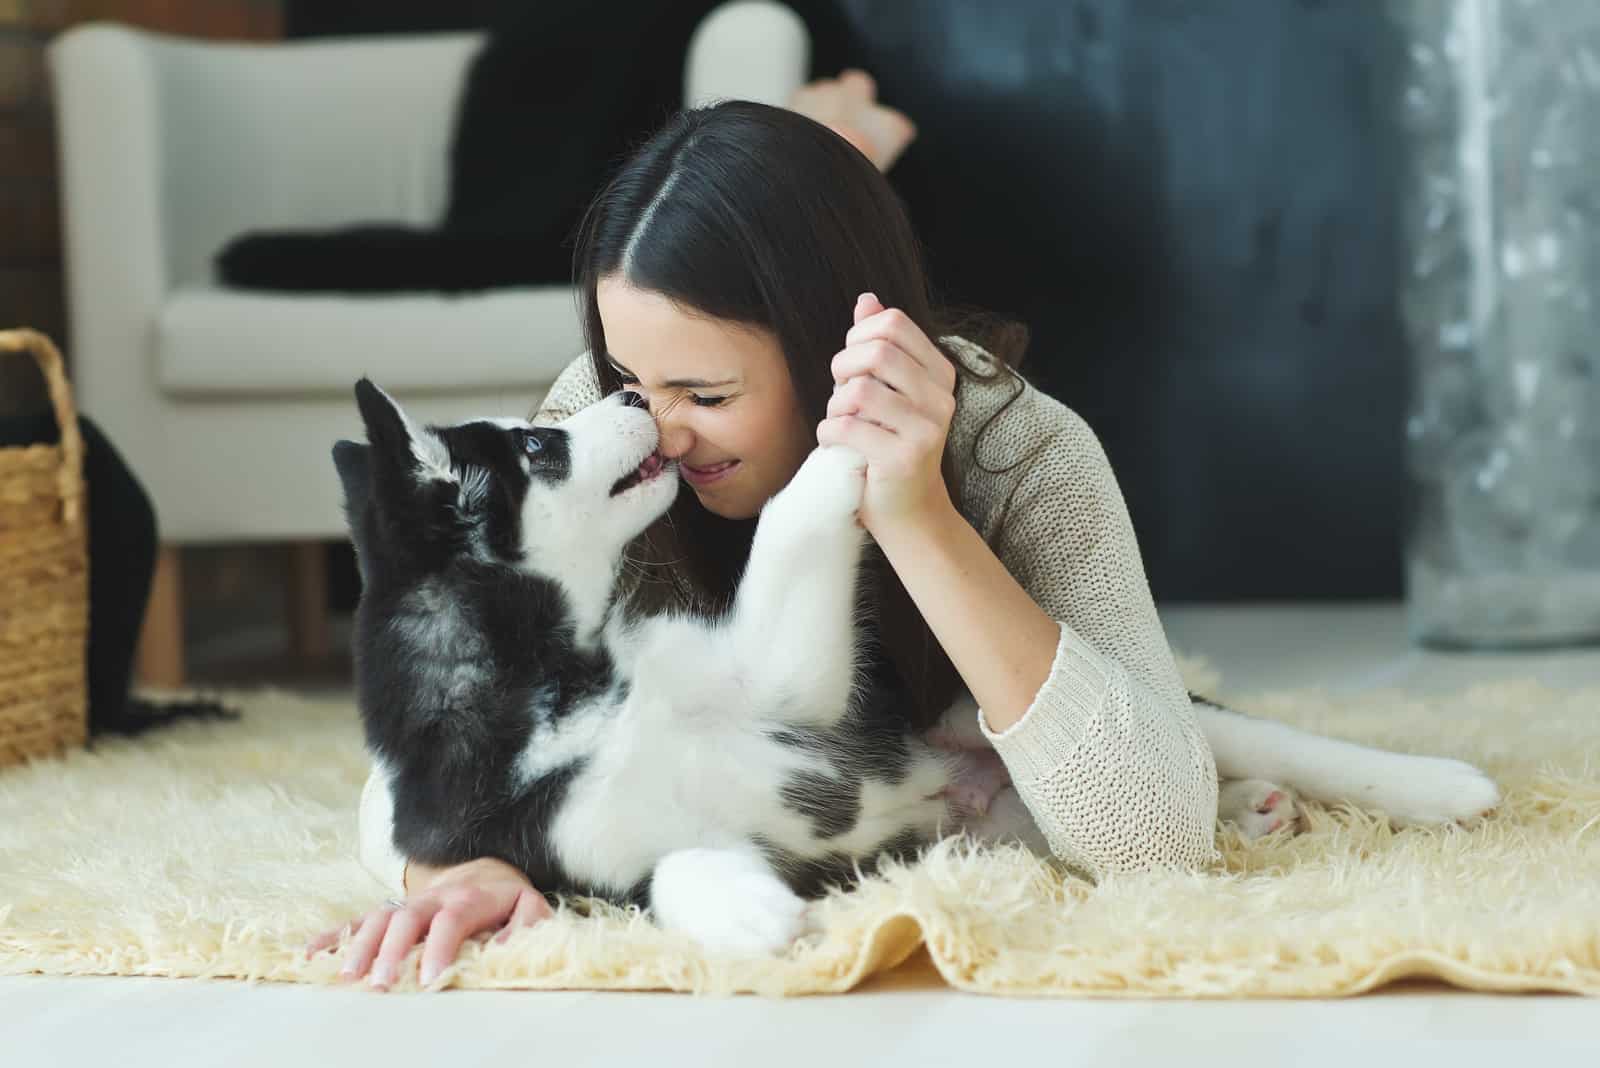 a woman is having fun with a husky on the floor of the room